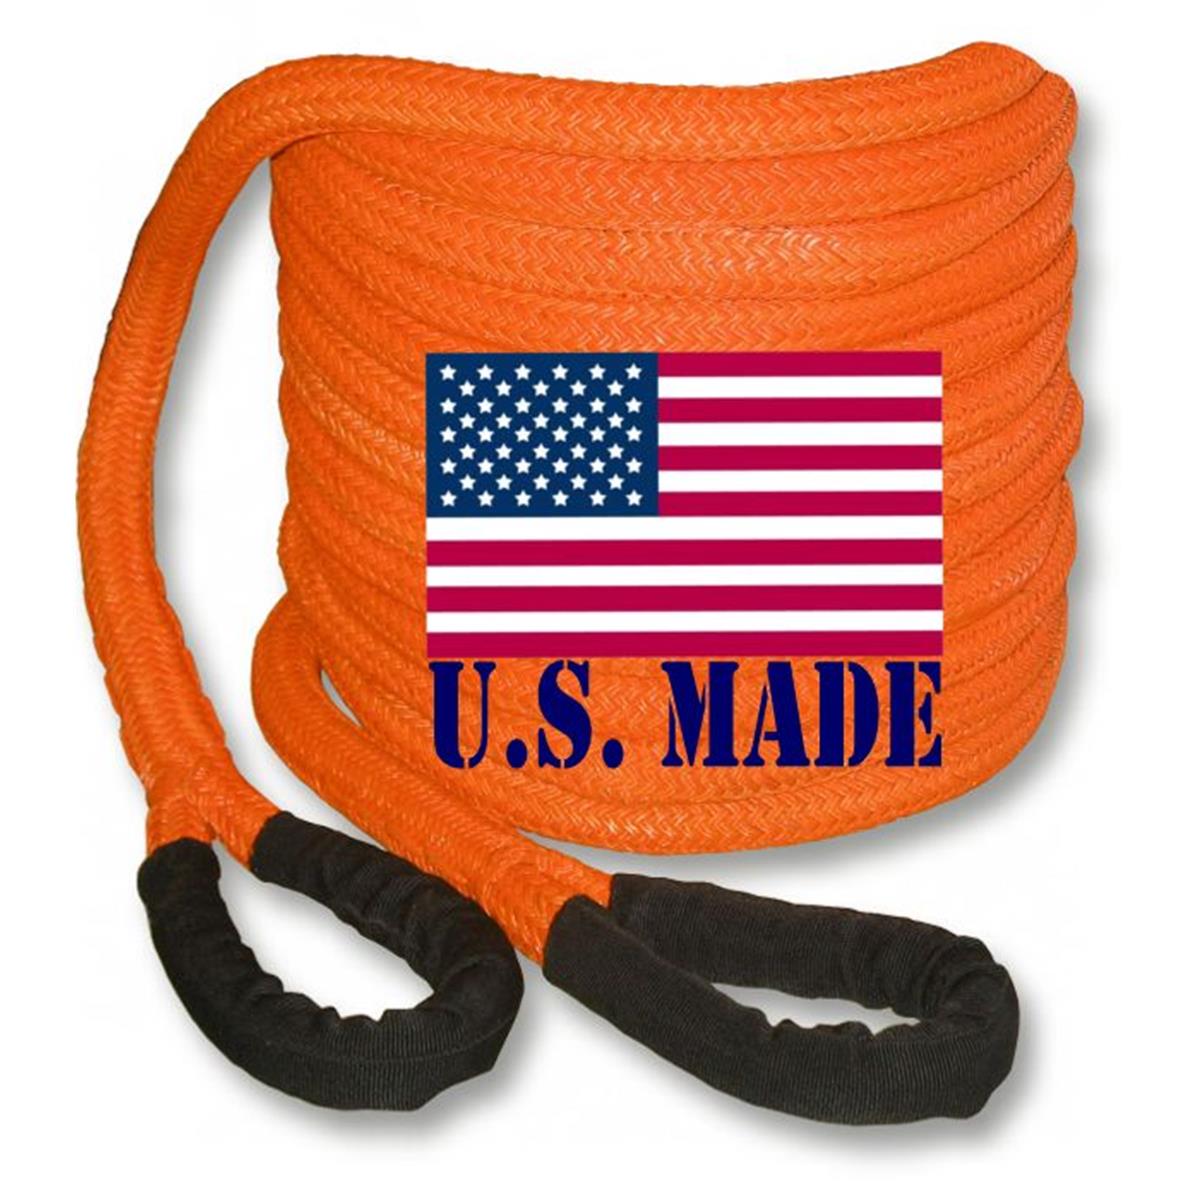 U.s. Made 1 Inch X 30 Ft "football Orange" Safe-t-line® Kinetic Recovery Rope (4x4 Vehicle Recovery)